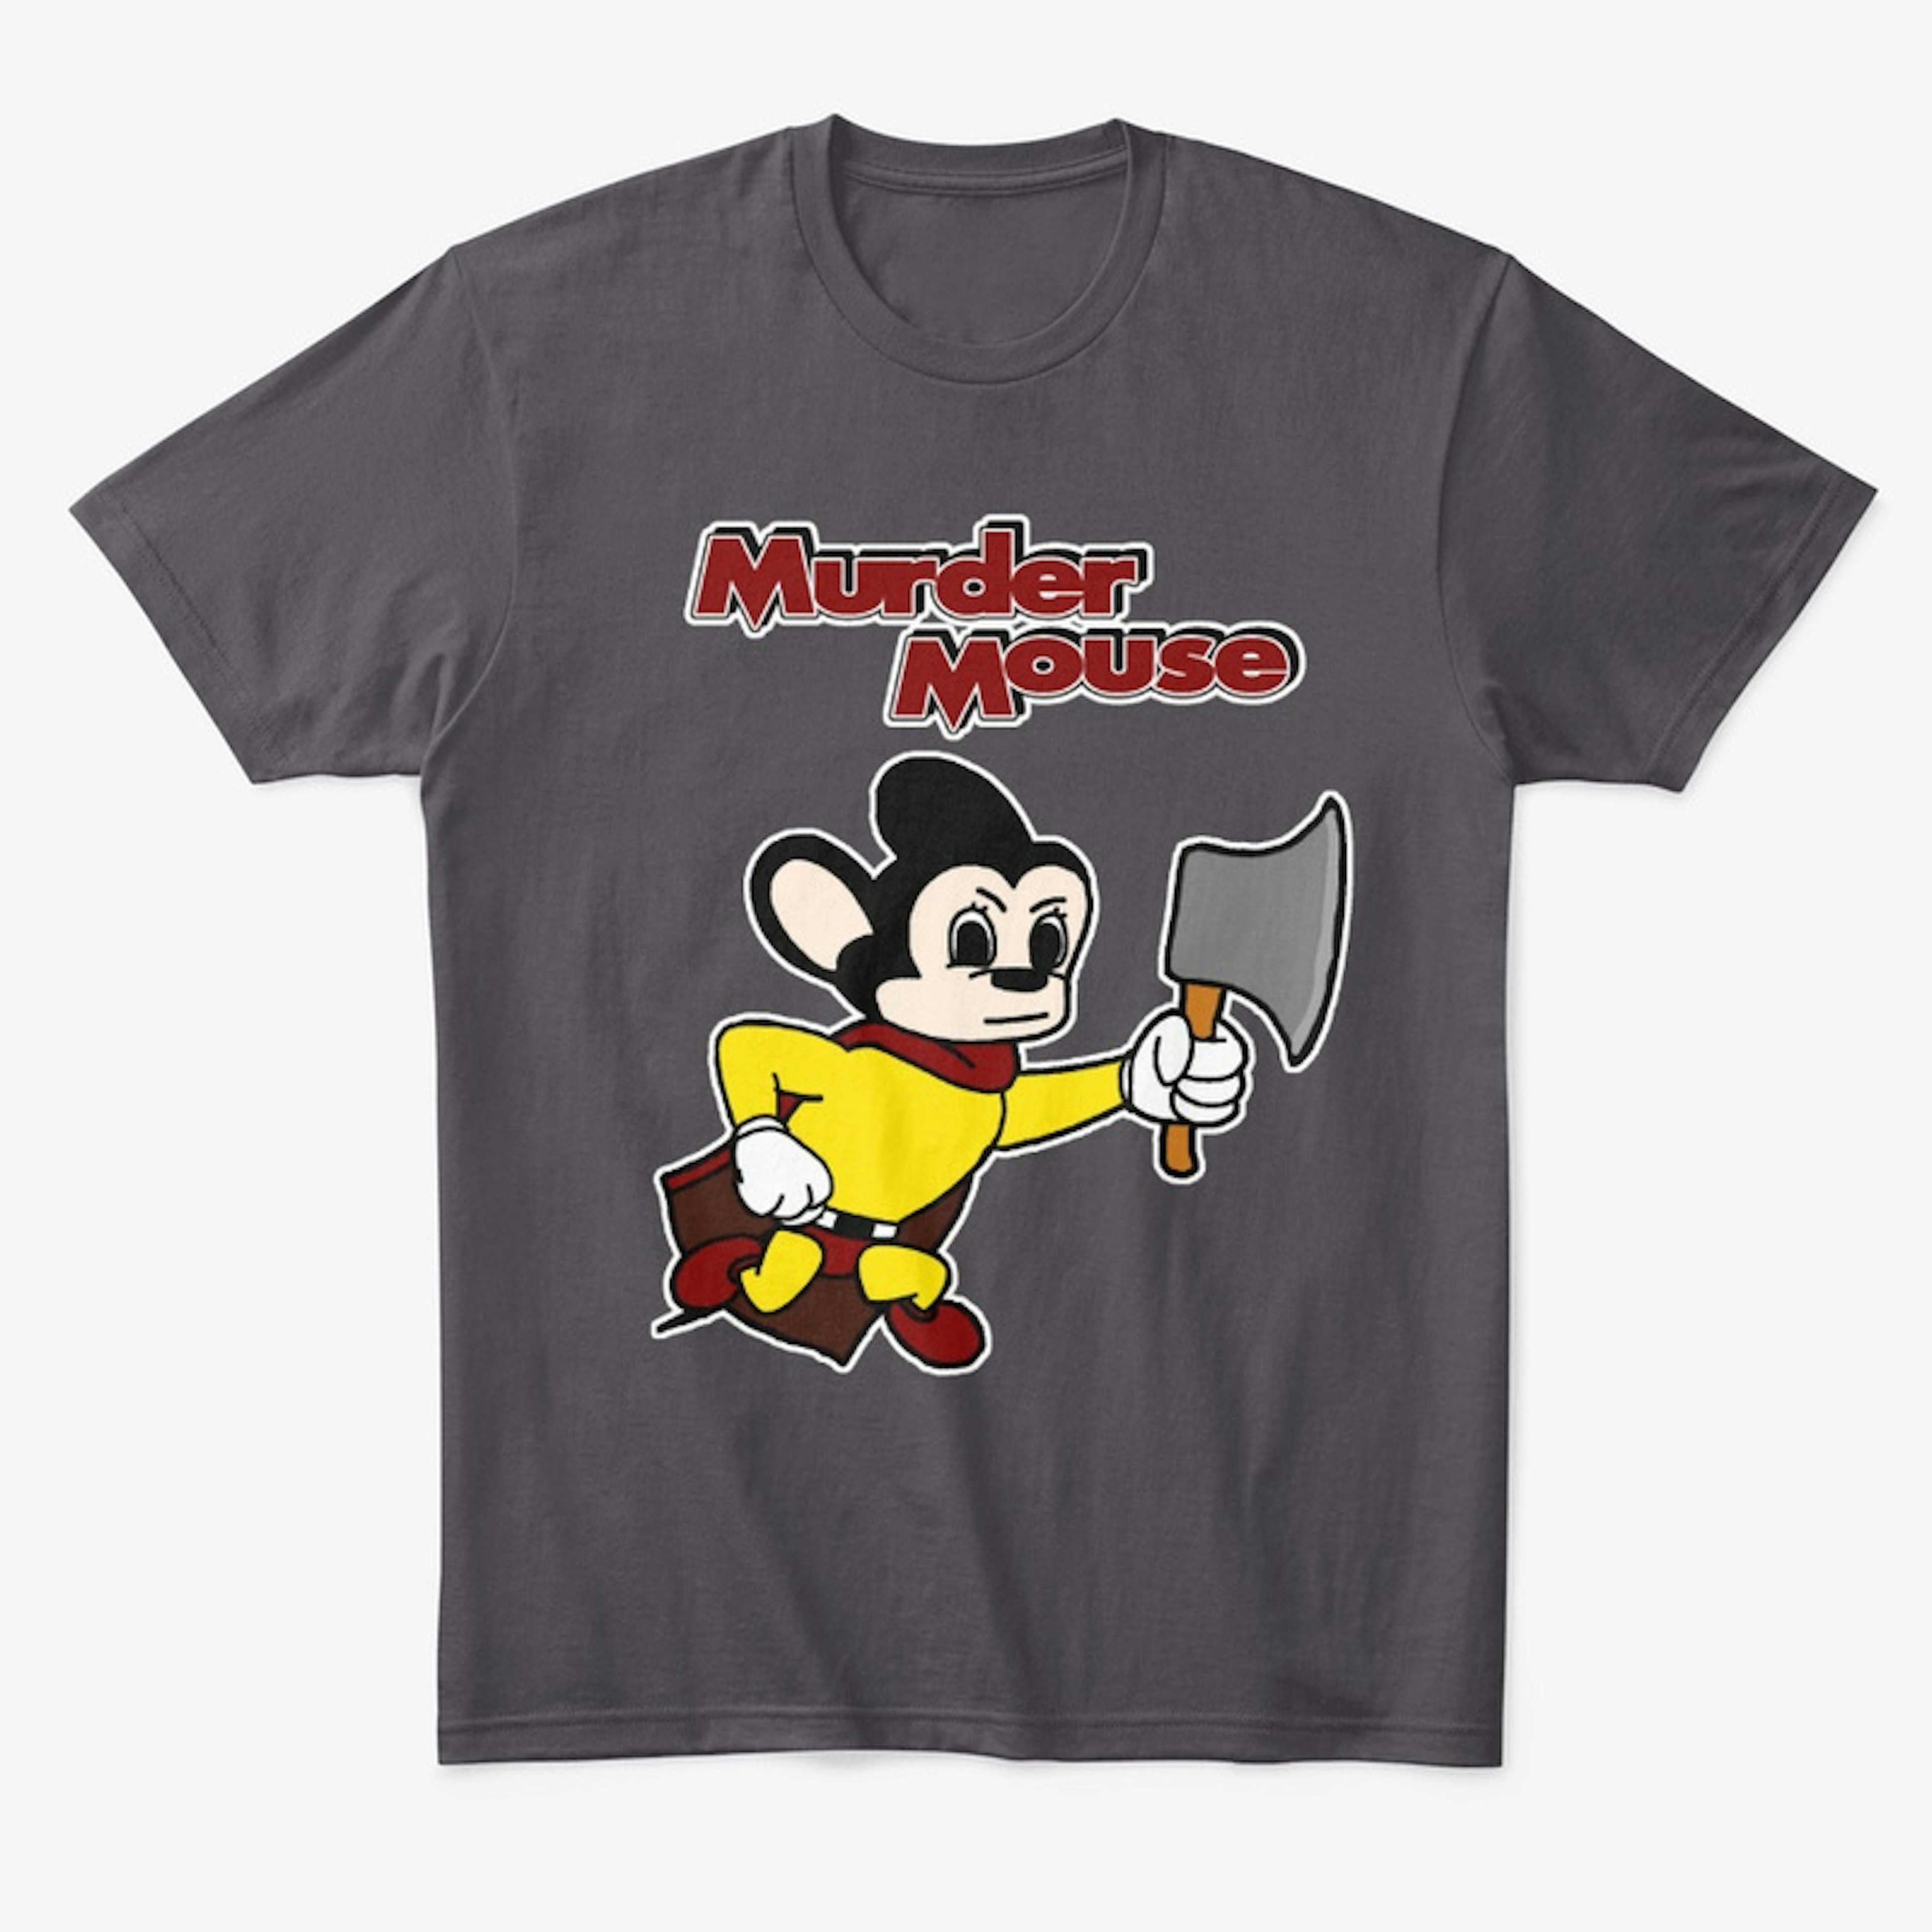 Murder Mouse Tee